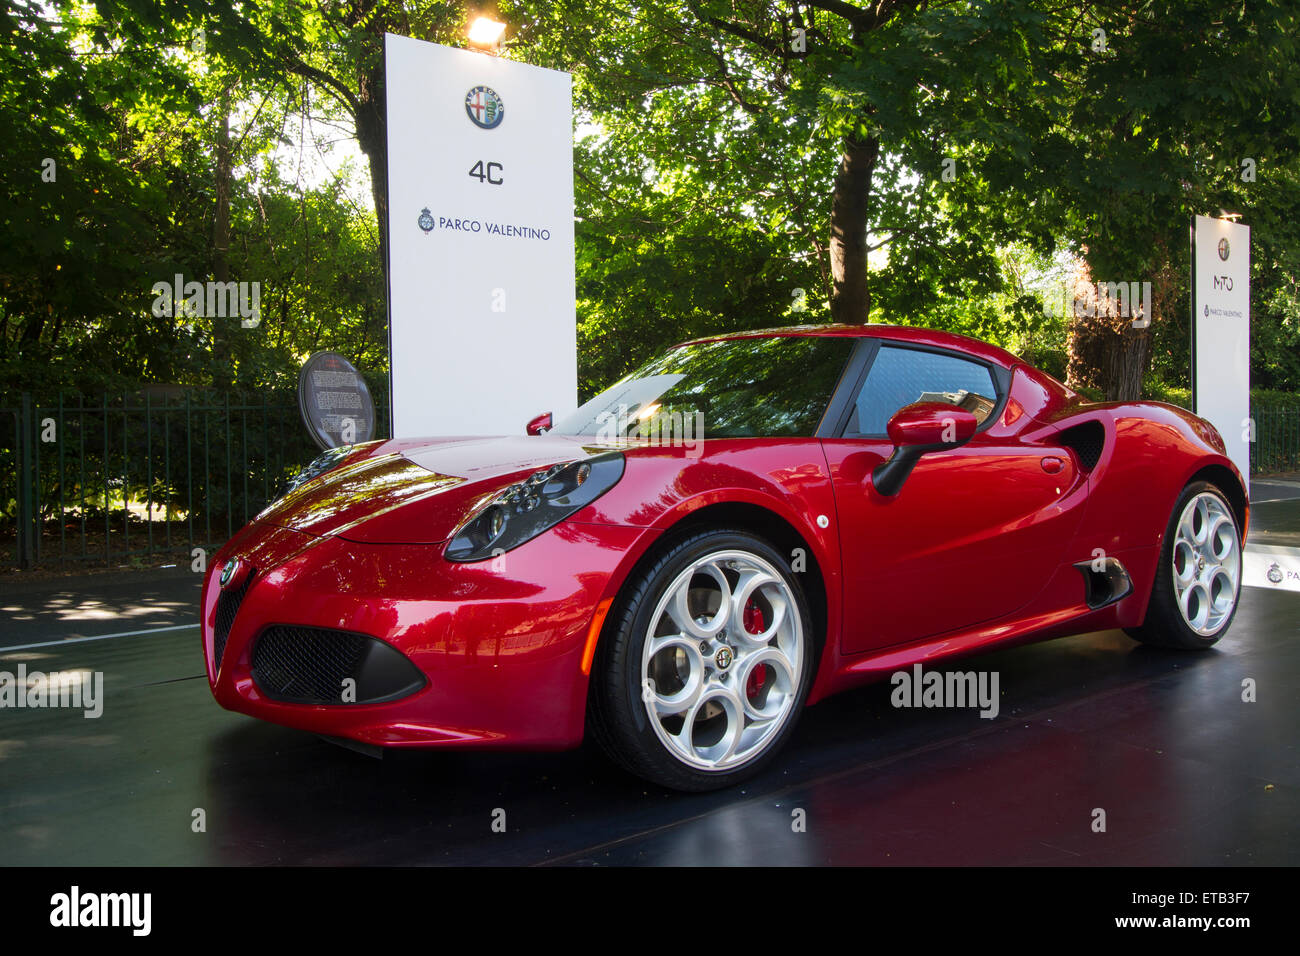 Turin, Italy, 11th June 2015. Alfa Romeo 4C. Parco Valentino car show hosted 93 cars by many automobile manufacturers and car designers inside Valentino Park, Torino, Italy. Stock Photo